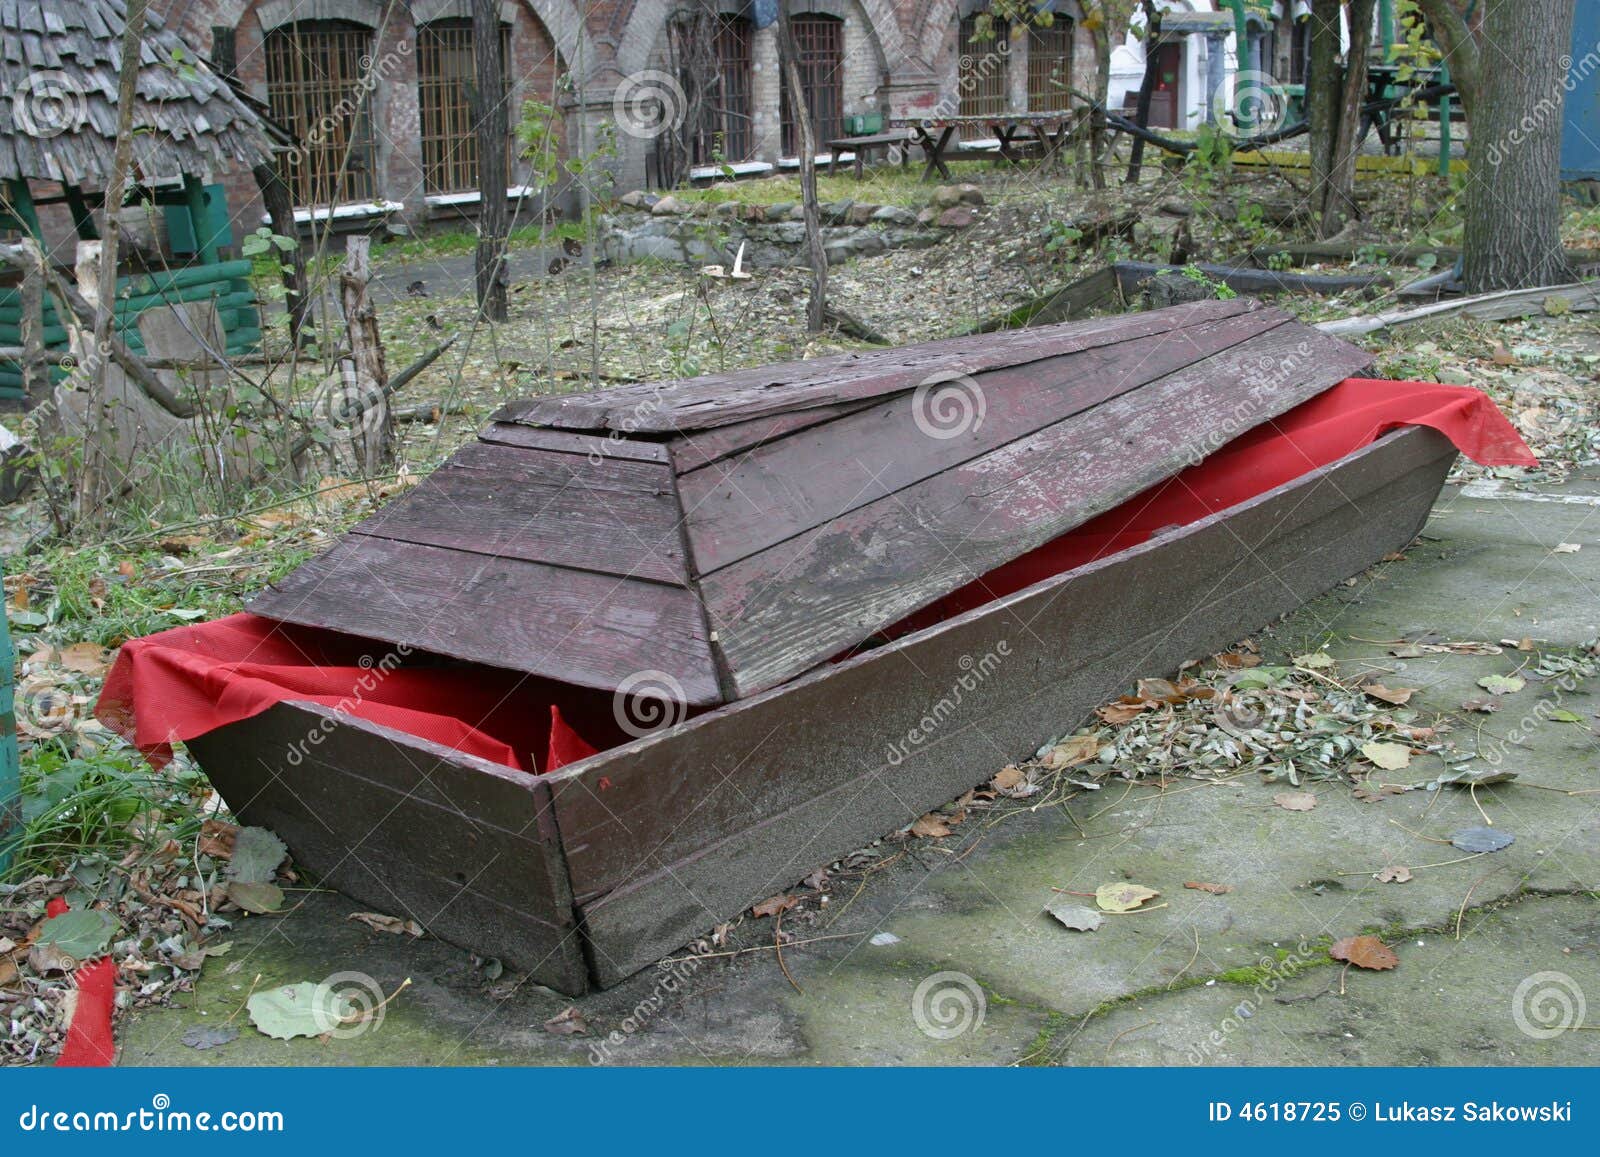 solitary coffin